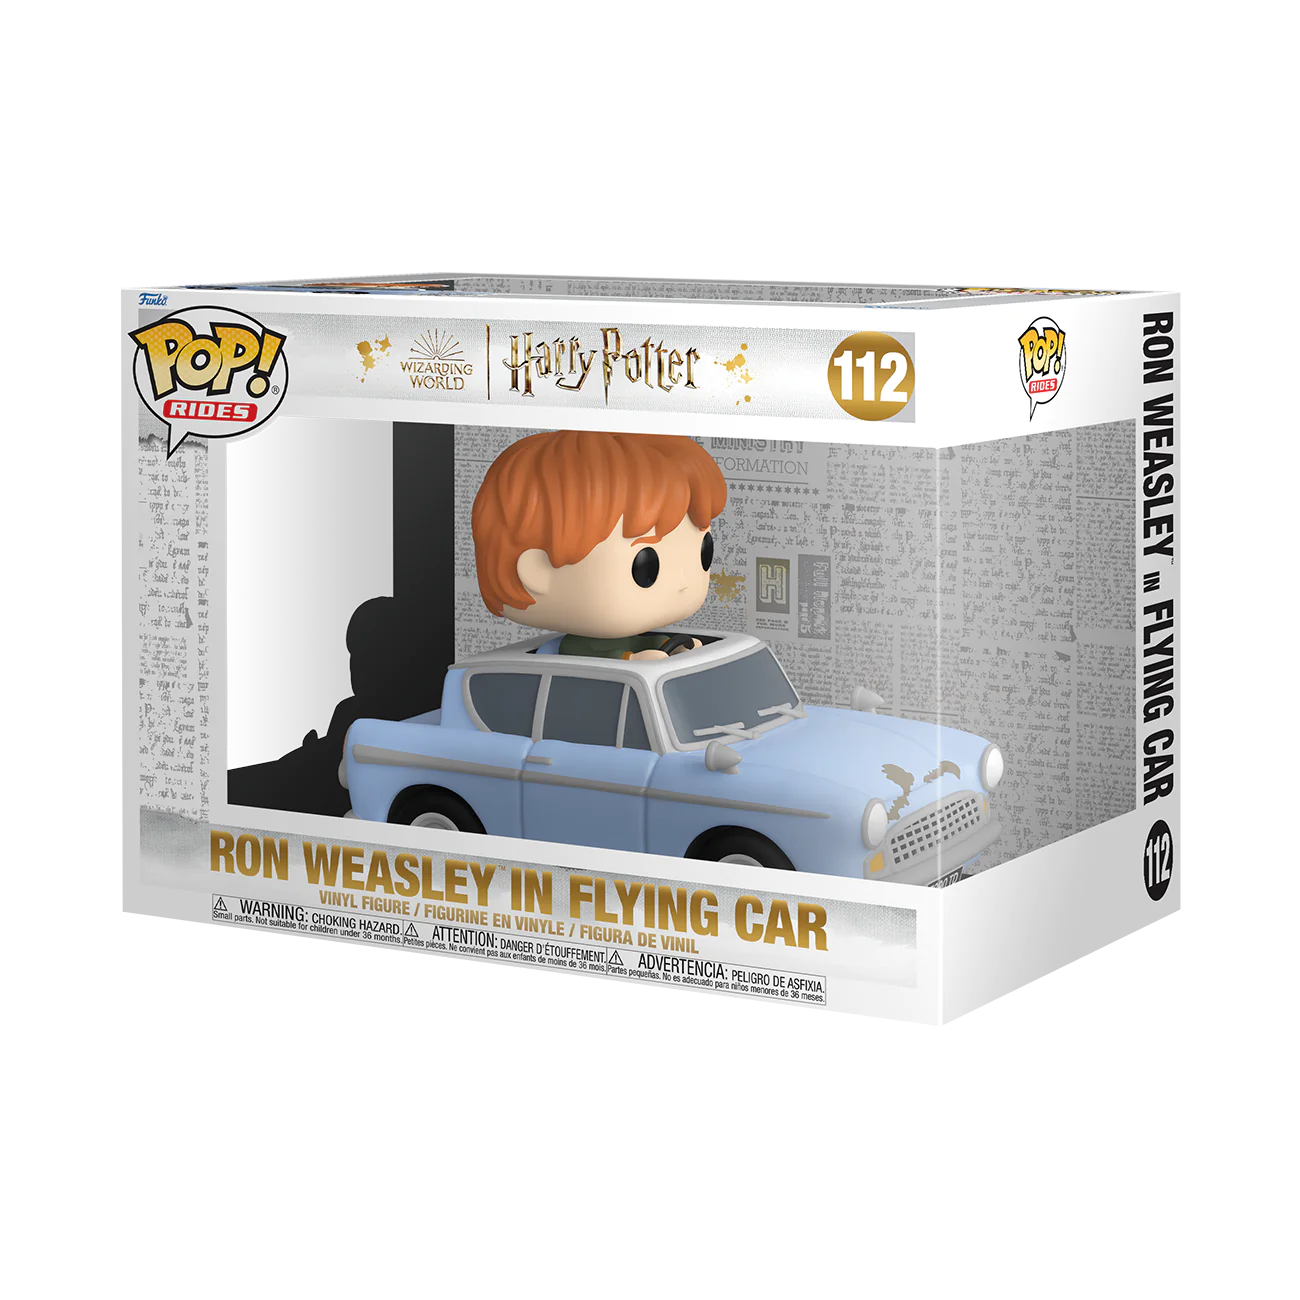 Pop Rides Super Deluxe: Harry Potter Chamber Of Secrets Anniversary 20th - Ron Weasley In Flying Car - Thumbnail